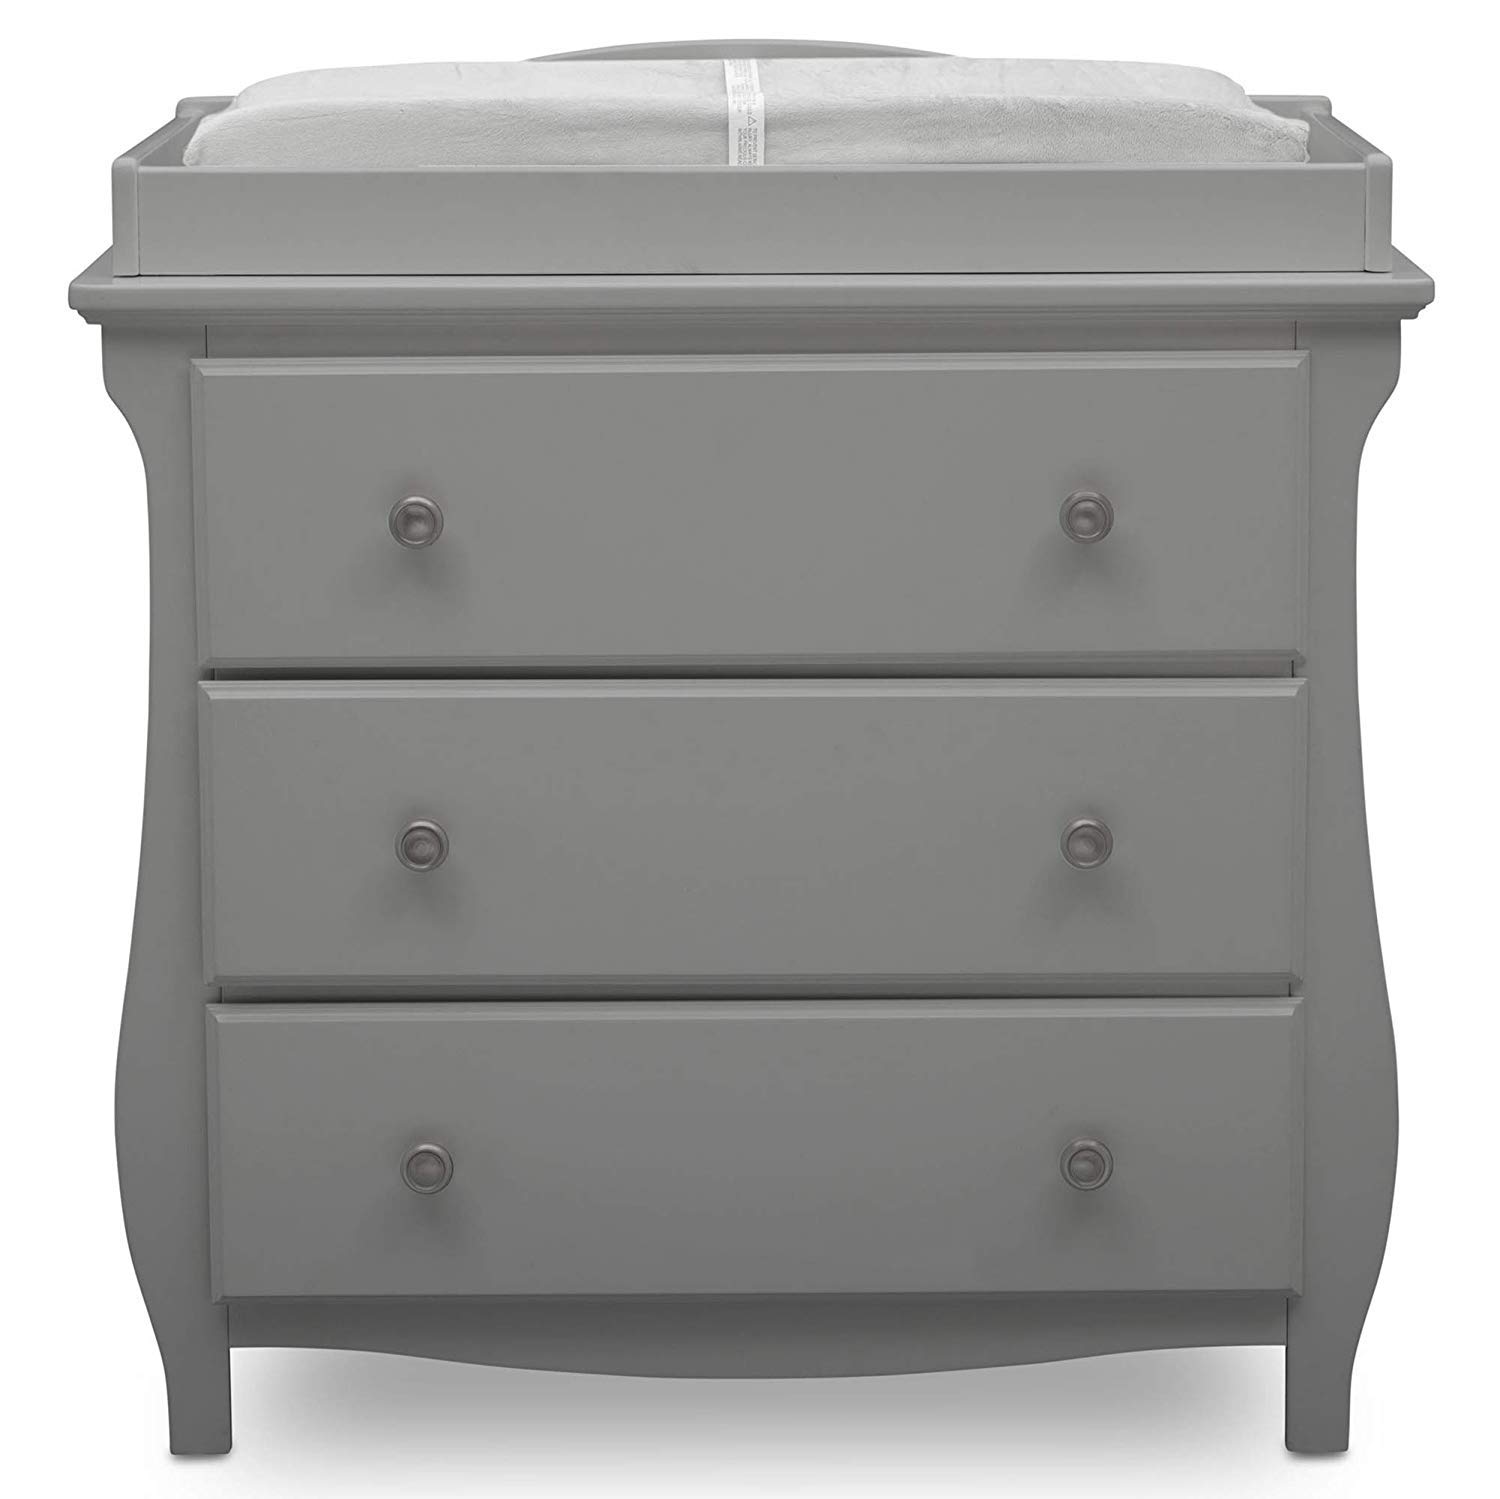 Delta Children Lancaster 3 Drawer Dresser with Changing Top, Grey and Contoured Changing Pad, White